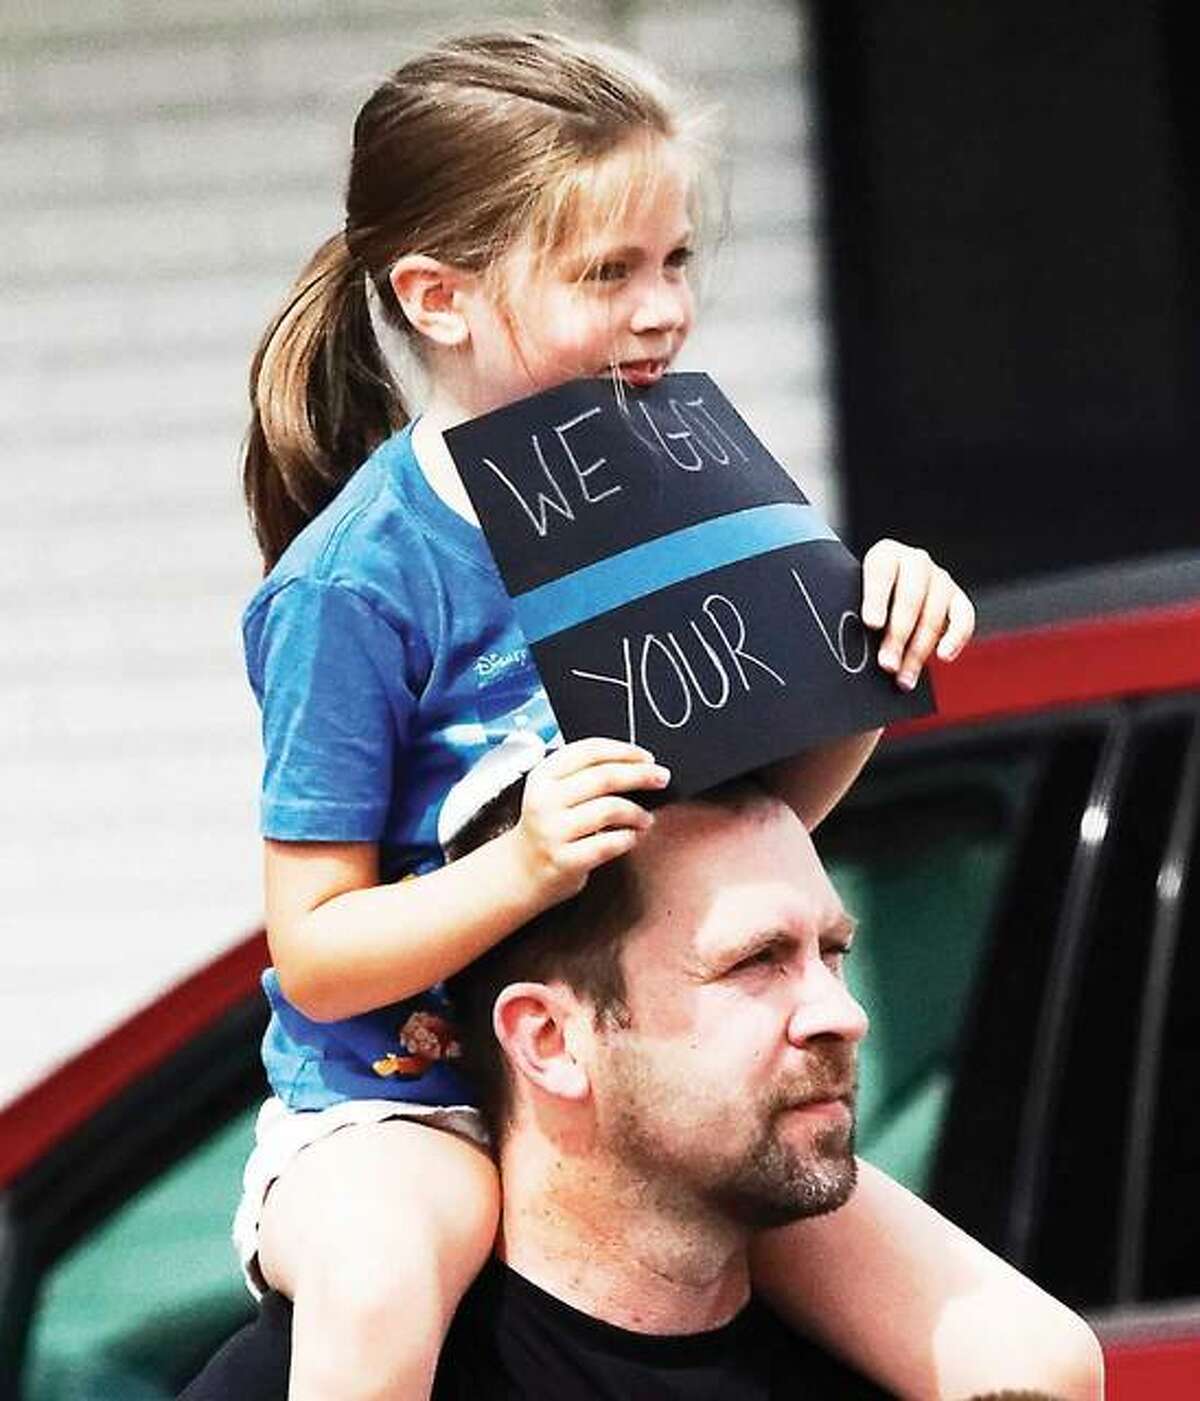 Isabella Hewitt perches on the shoulders of her father, Jason Hewitt, of Jerseyville, Sunday to watch the homecoming convoy of Jerseyville police officer Nathan Miller. She held a small sign reading “We got your 6.”